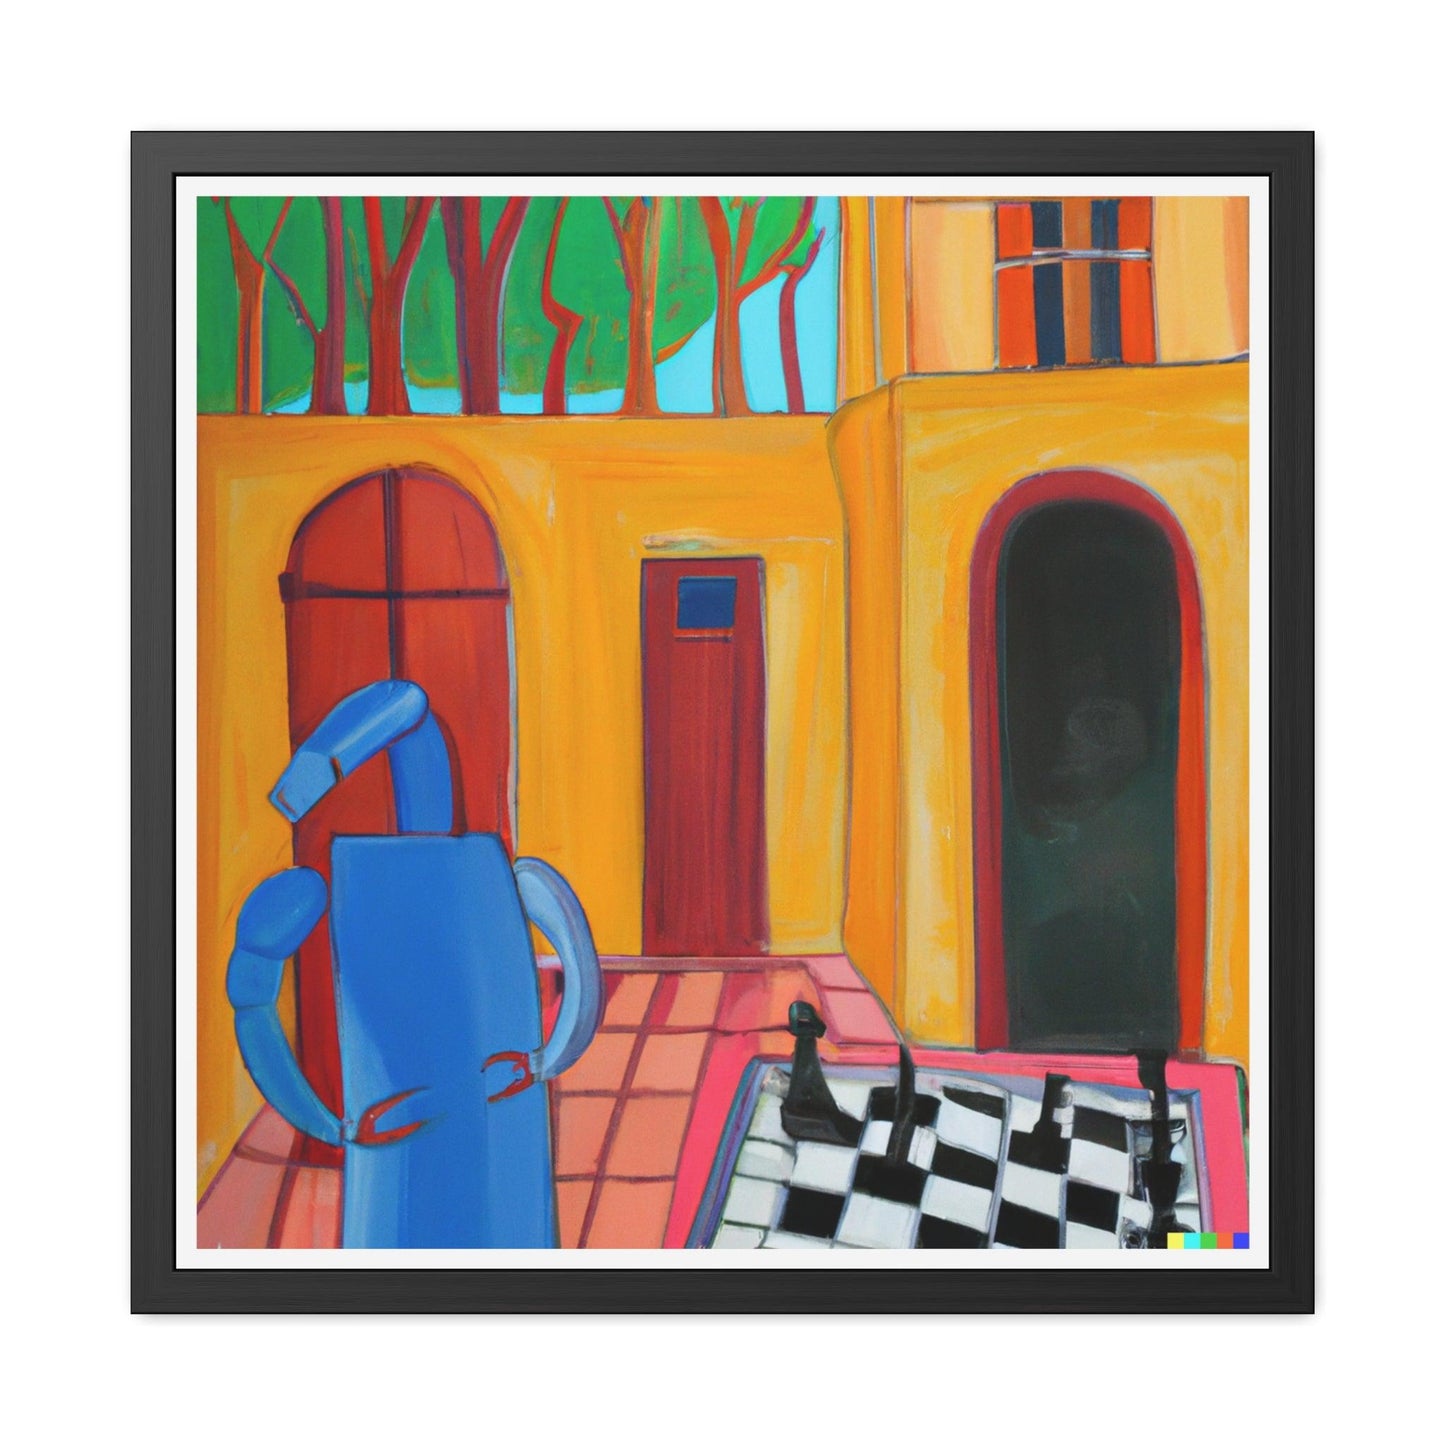 Blue Robot Playing Chess Poster Wall Art - MAIA HOMES